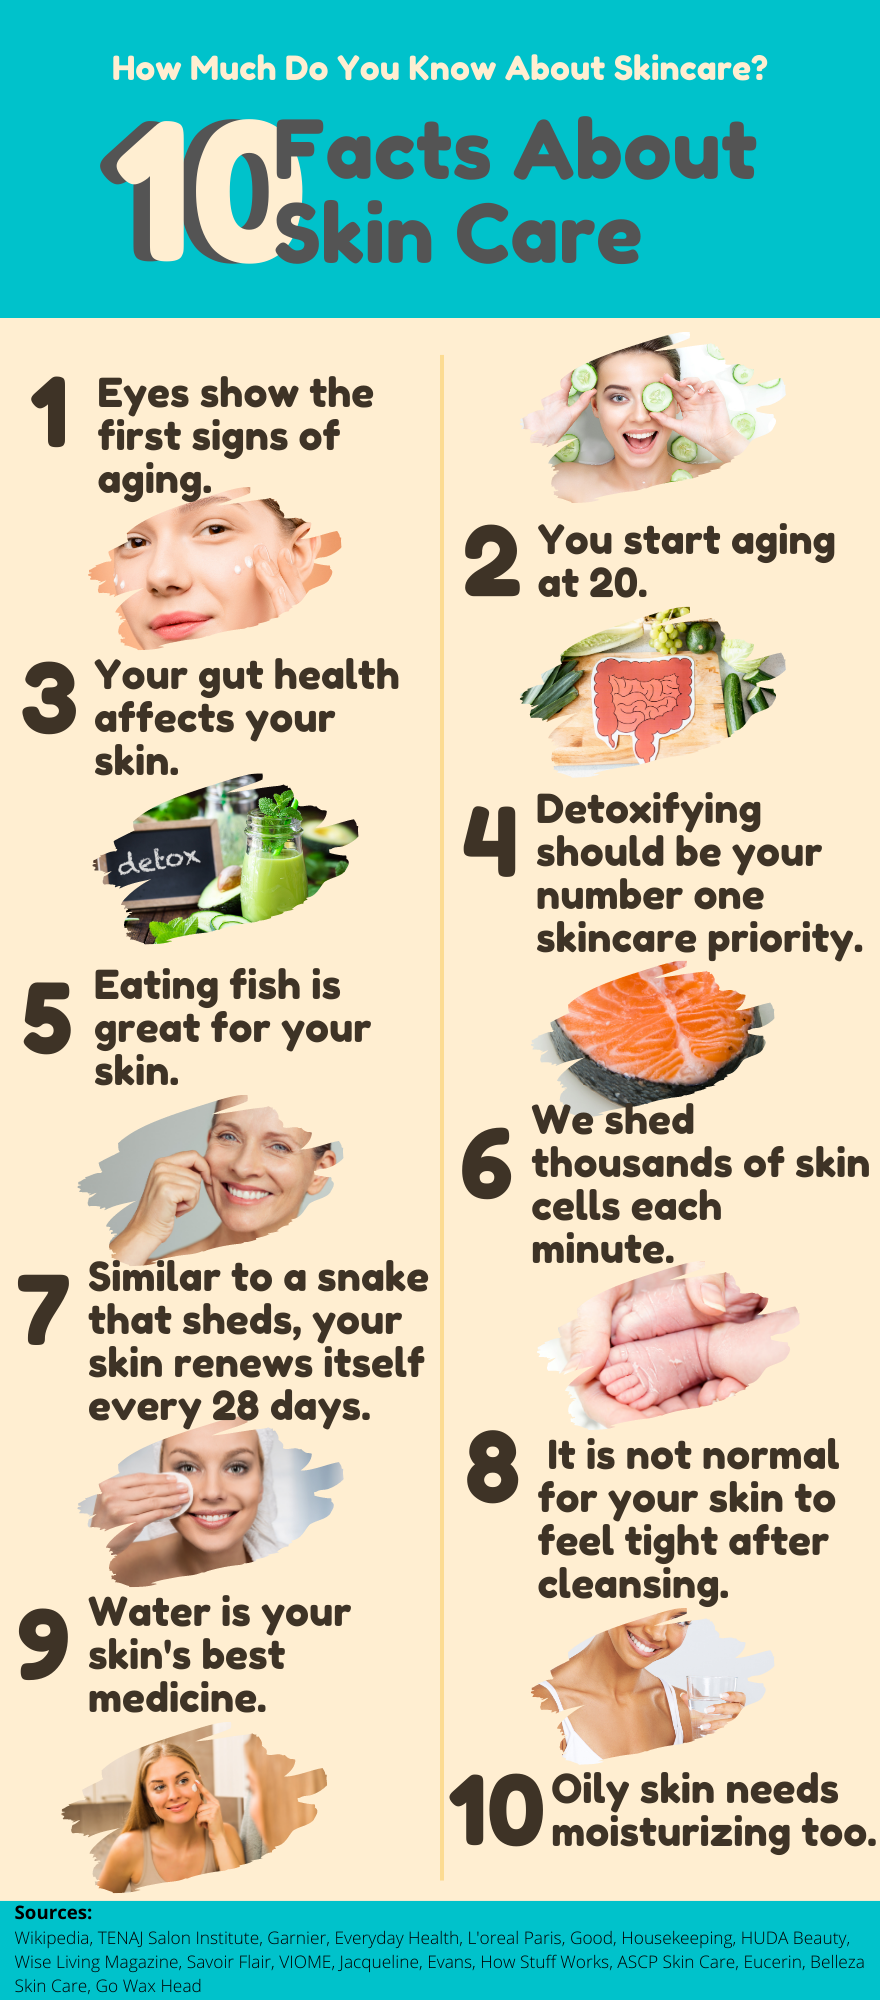 Much Do You Know Skincare? - Facts About Skin Care